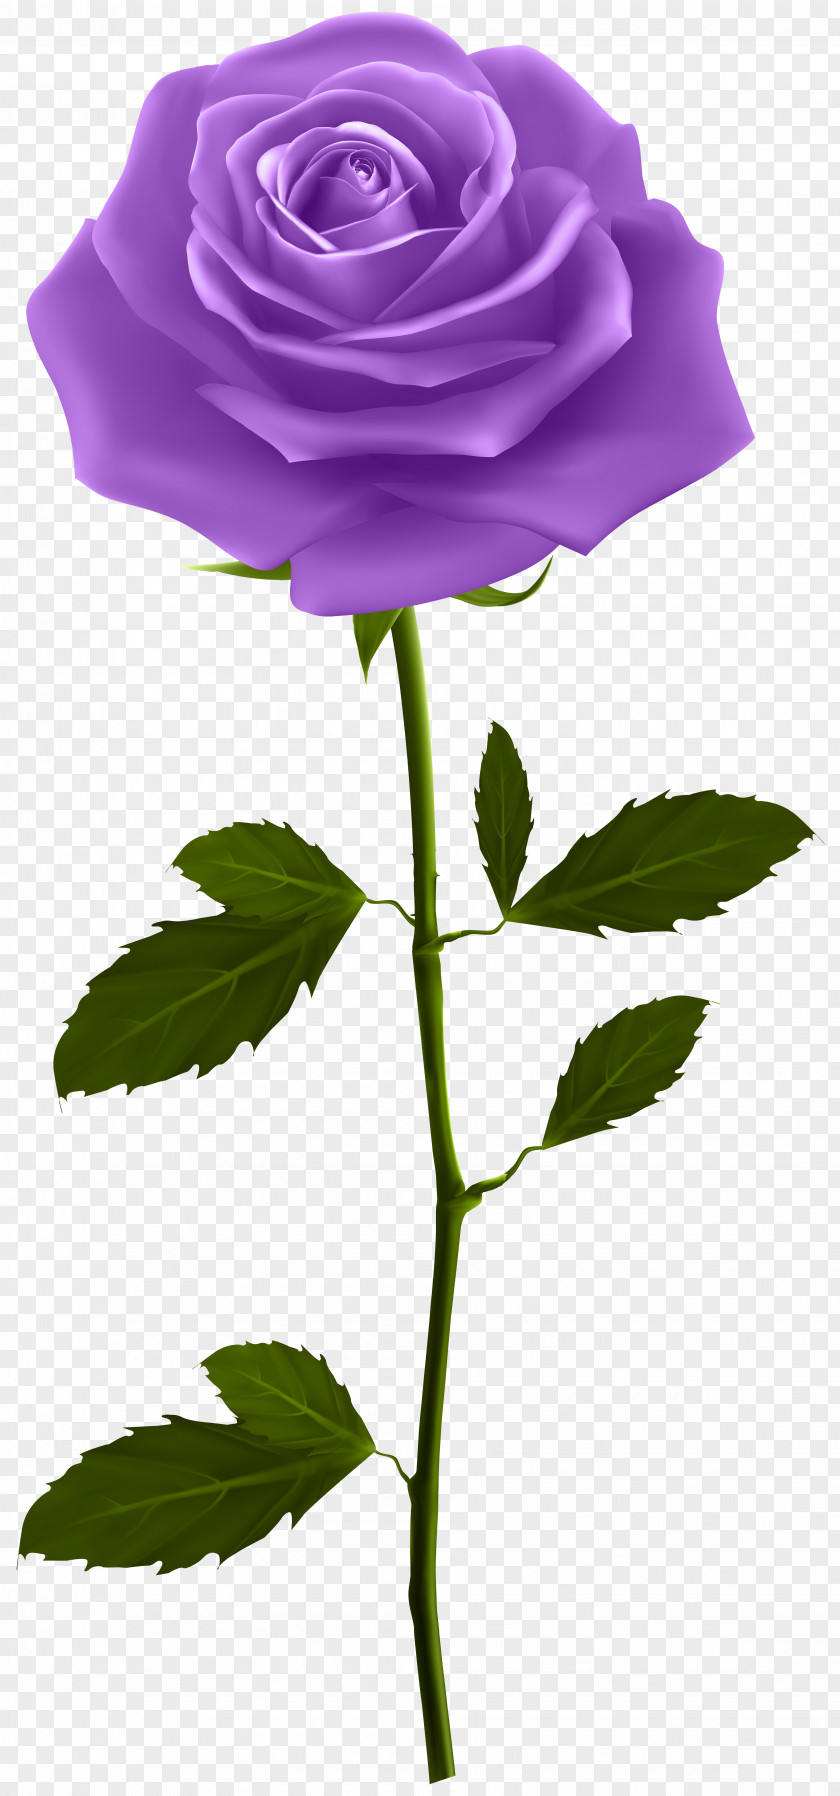 Purple Rose With Stem Clip Art Image PNG